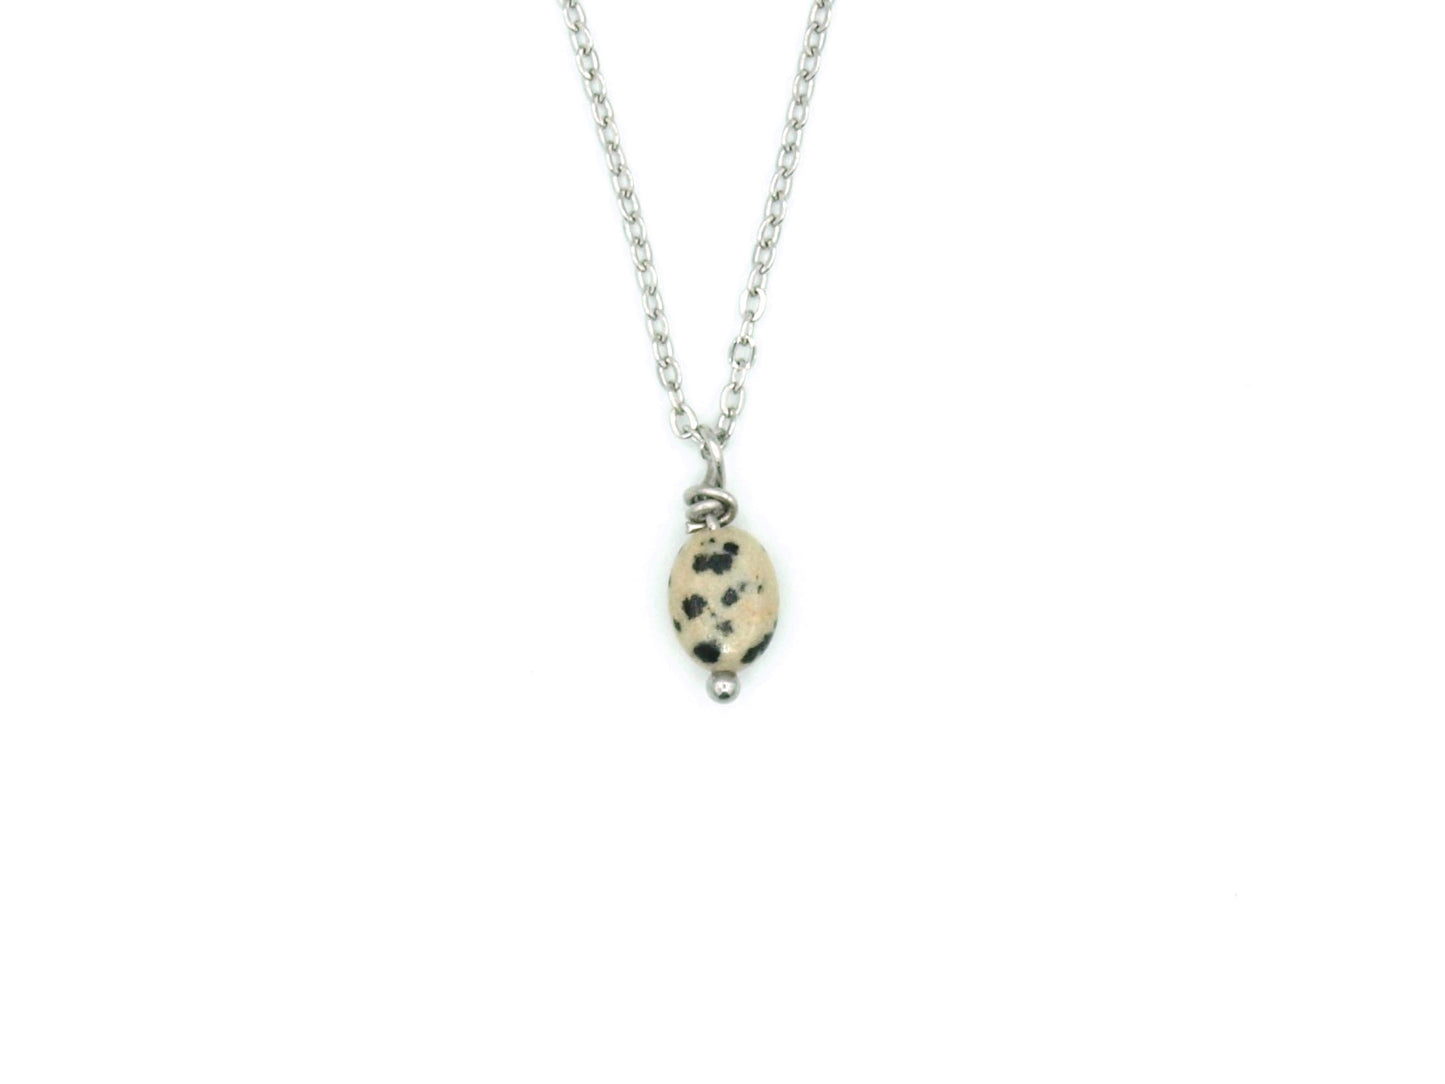 Necklace Lucy, dalmatian jasper, silver or gold stainless steel